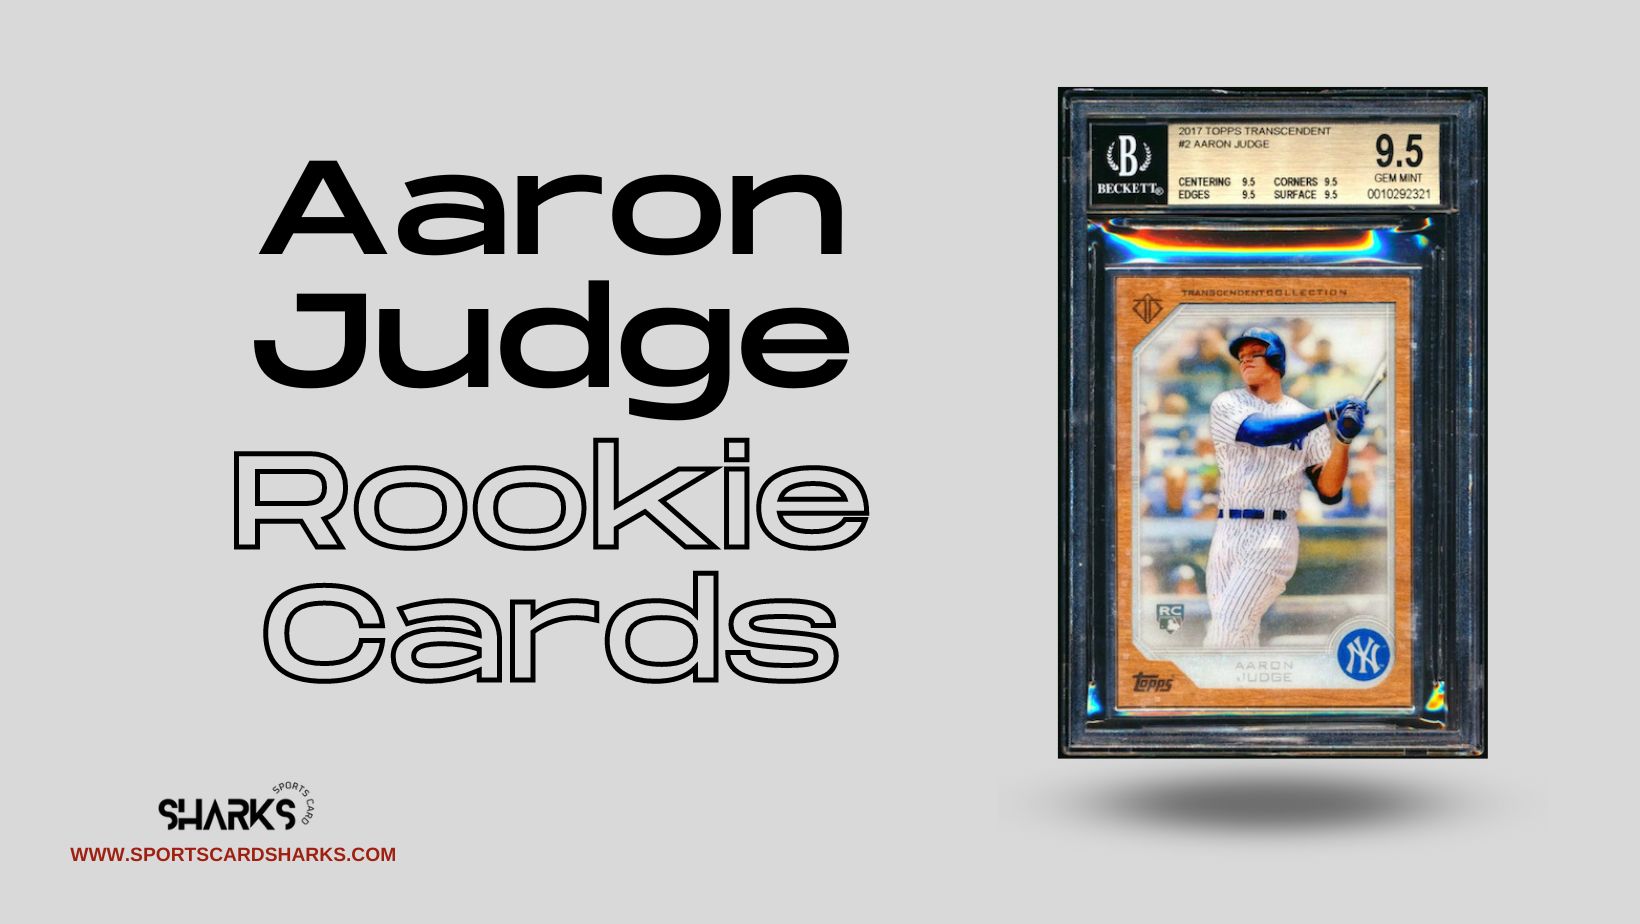 Featured image for the Best Aaron Judge Rookie Cards blog post on Sports Card Sharks